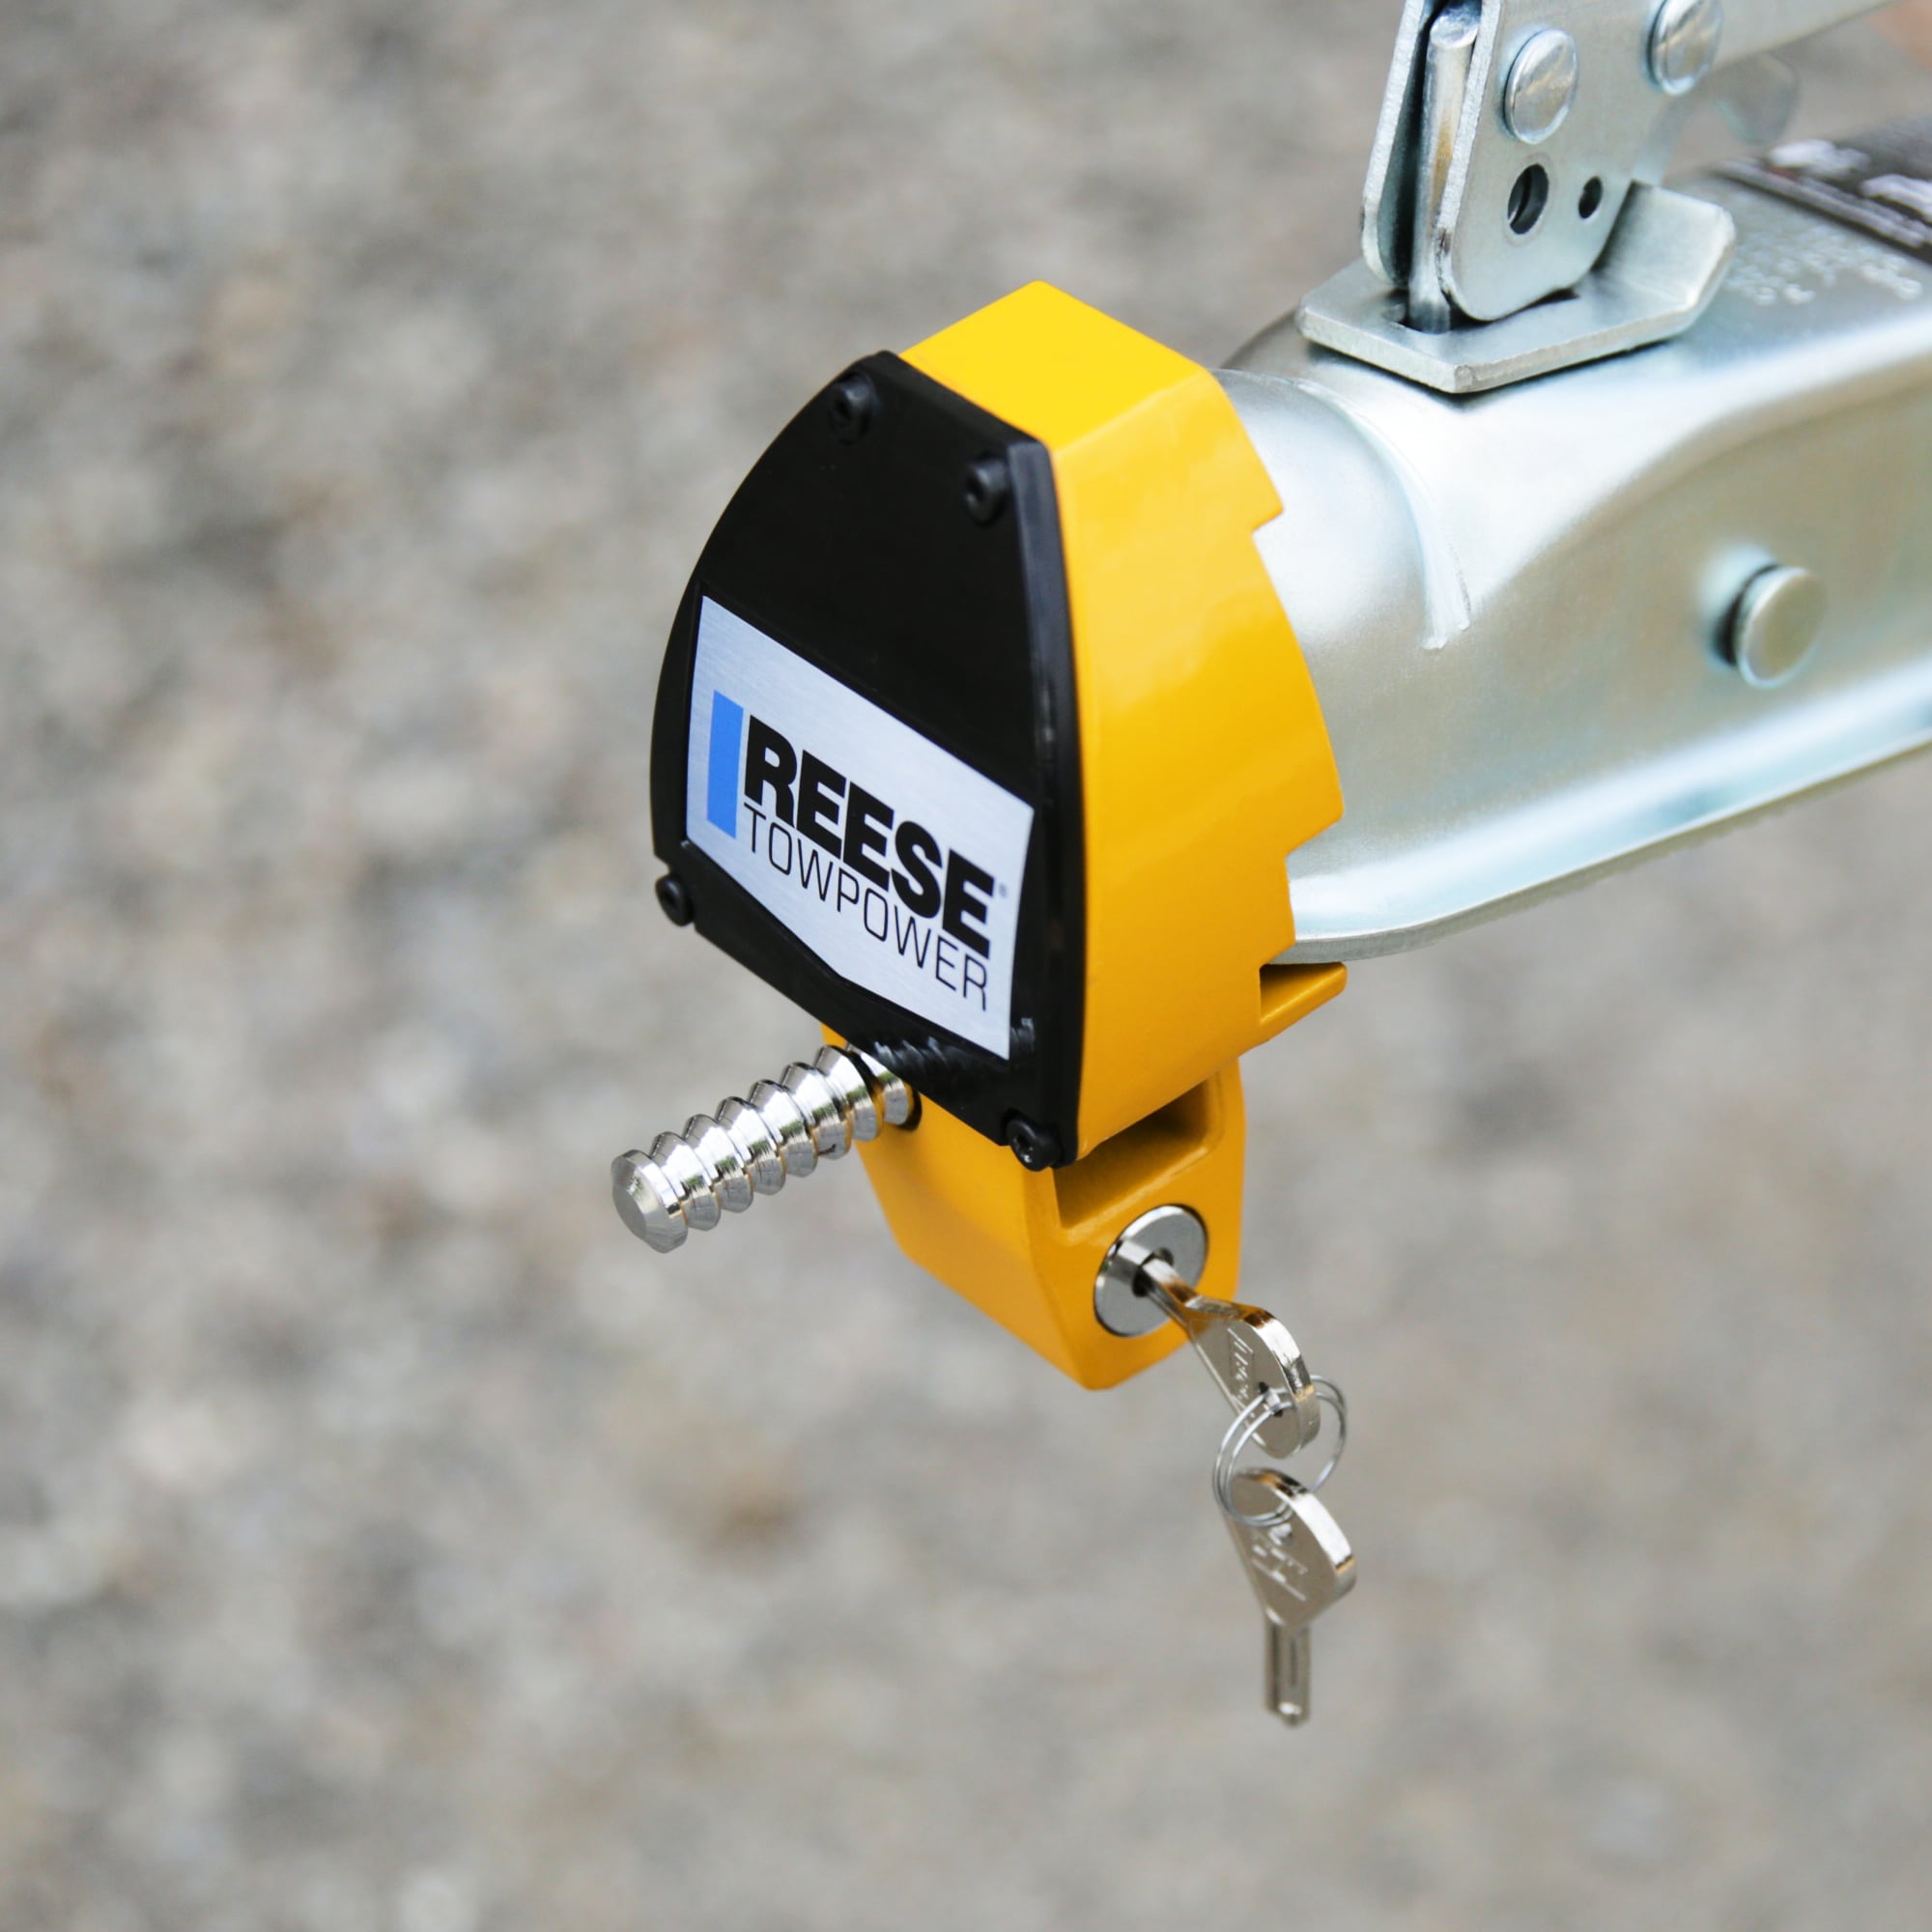 Reese Towpower Professional Universal Coupler Lock in the Trailer Parts &  Accessories department at